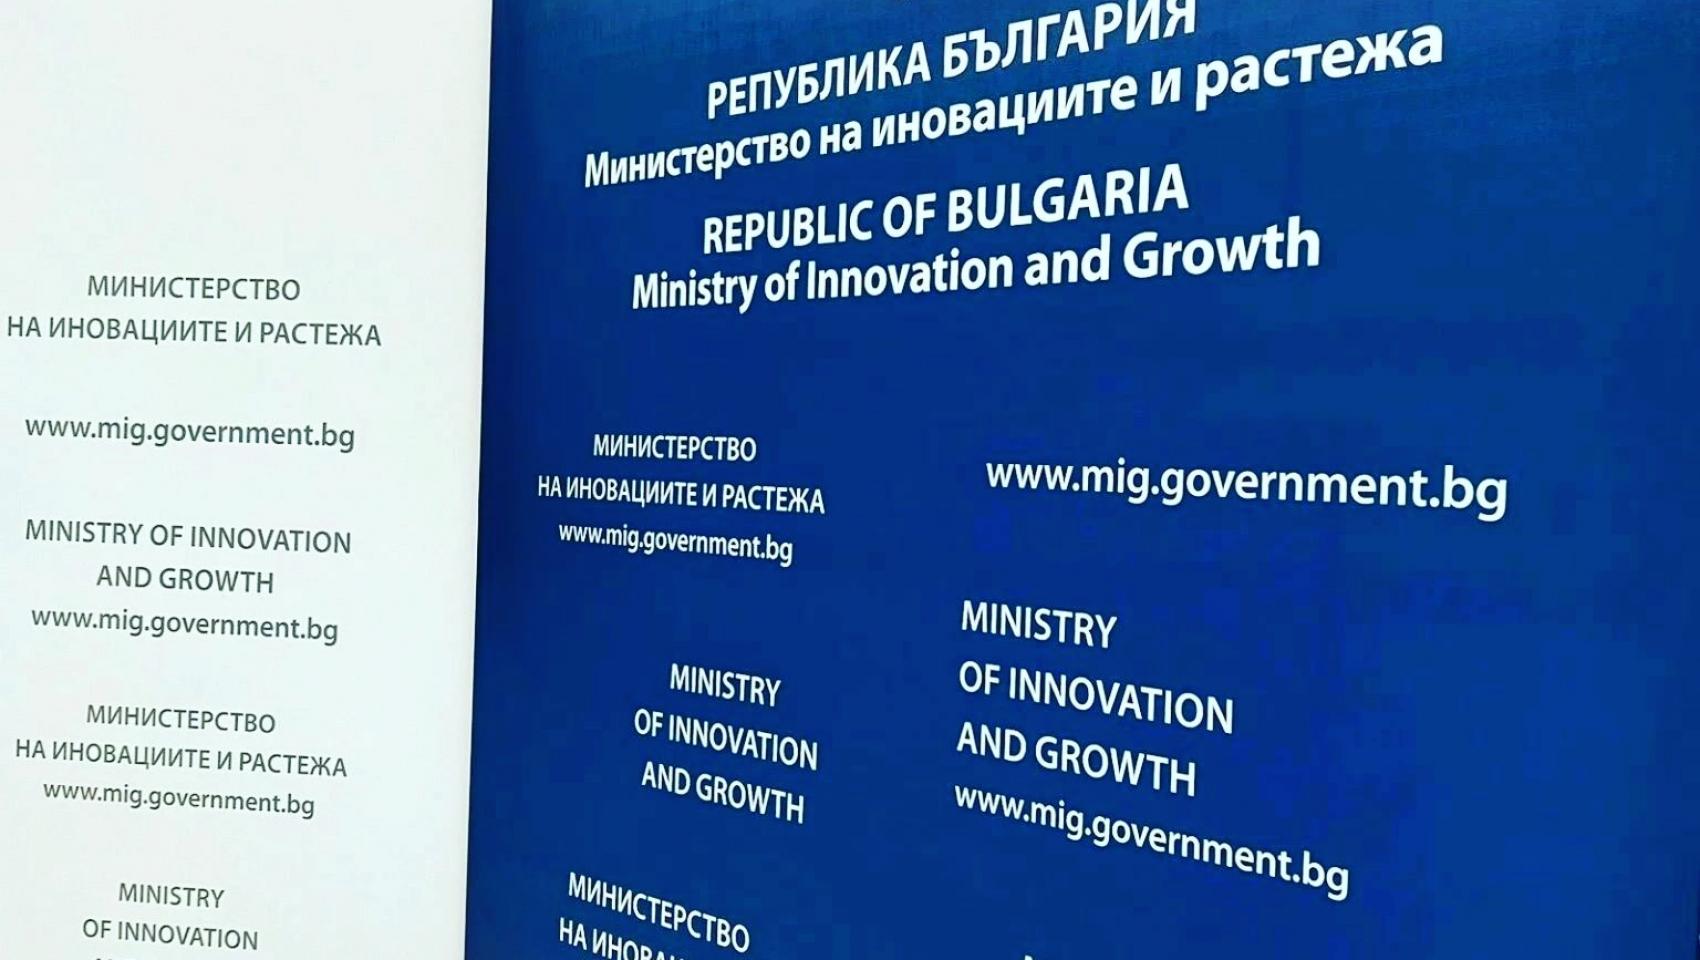 The Ministry of Innovation and Growth (MIG) has extended until